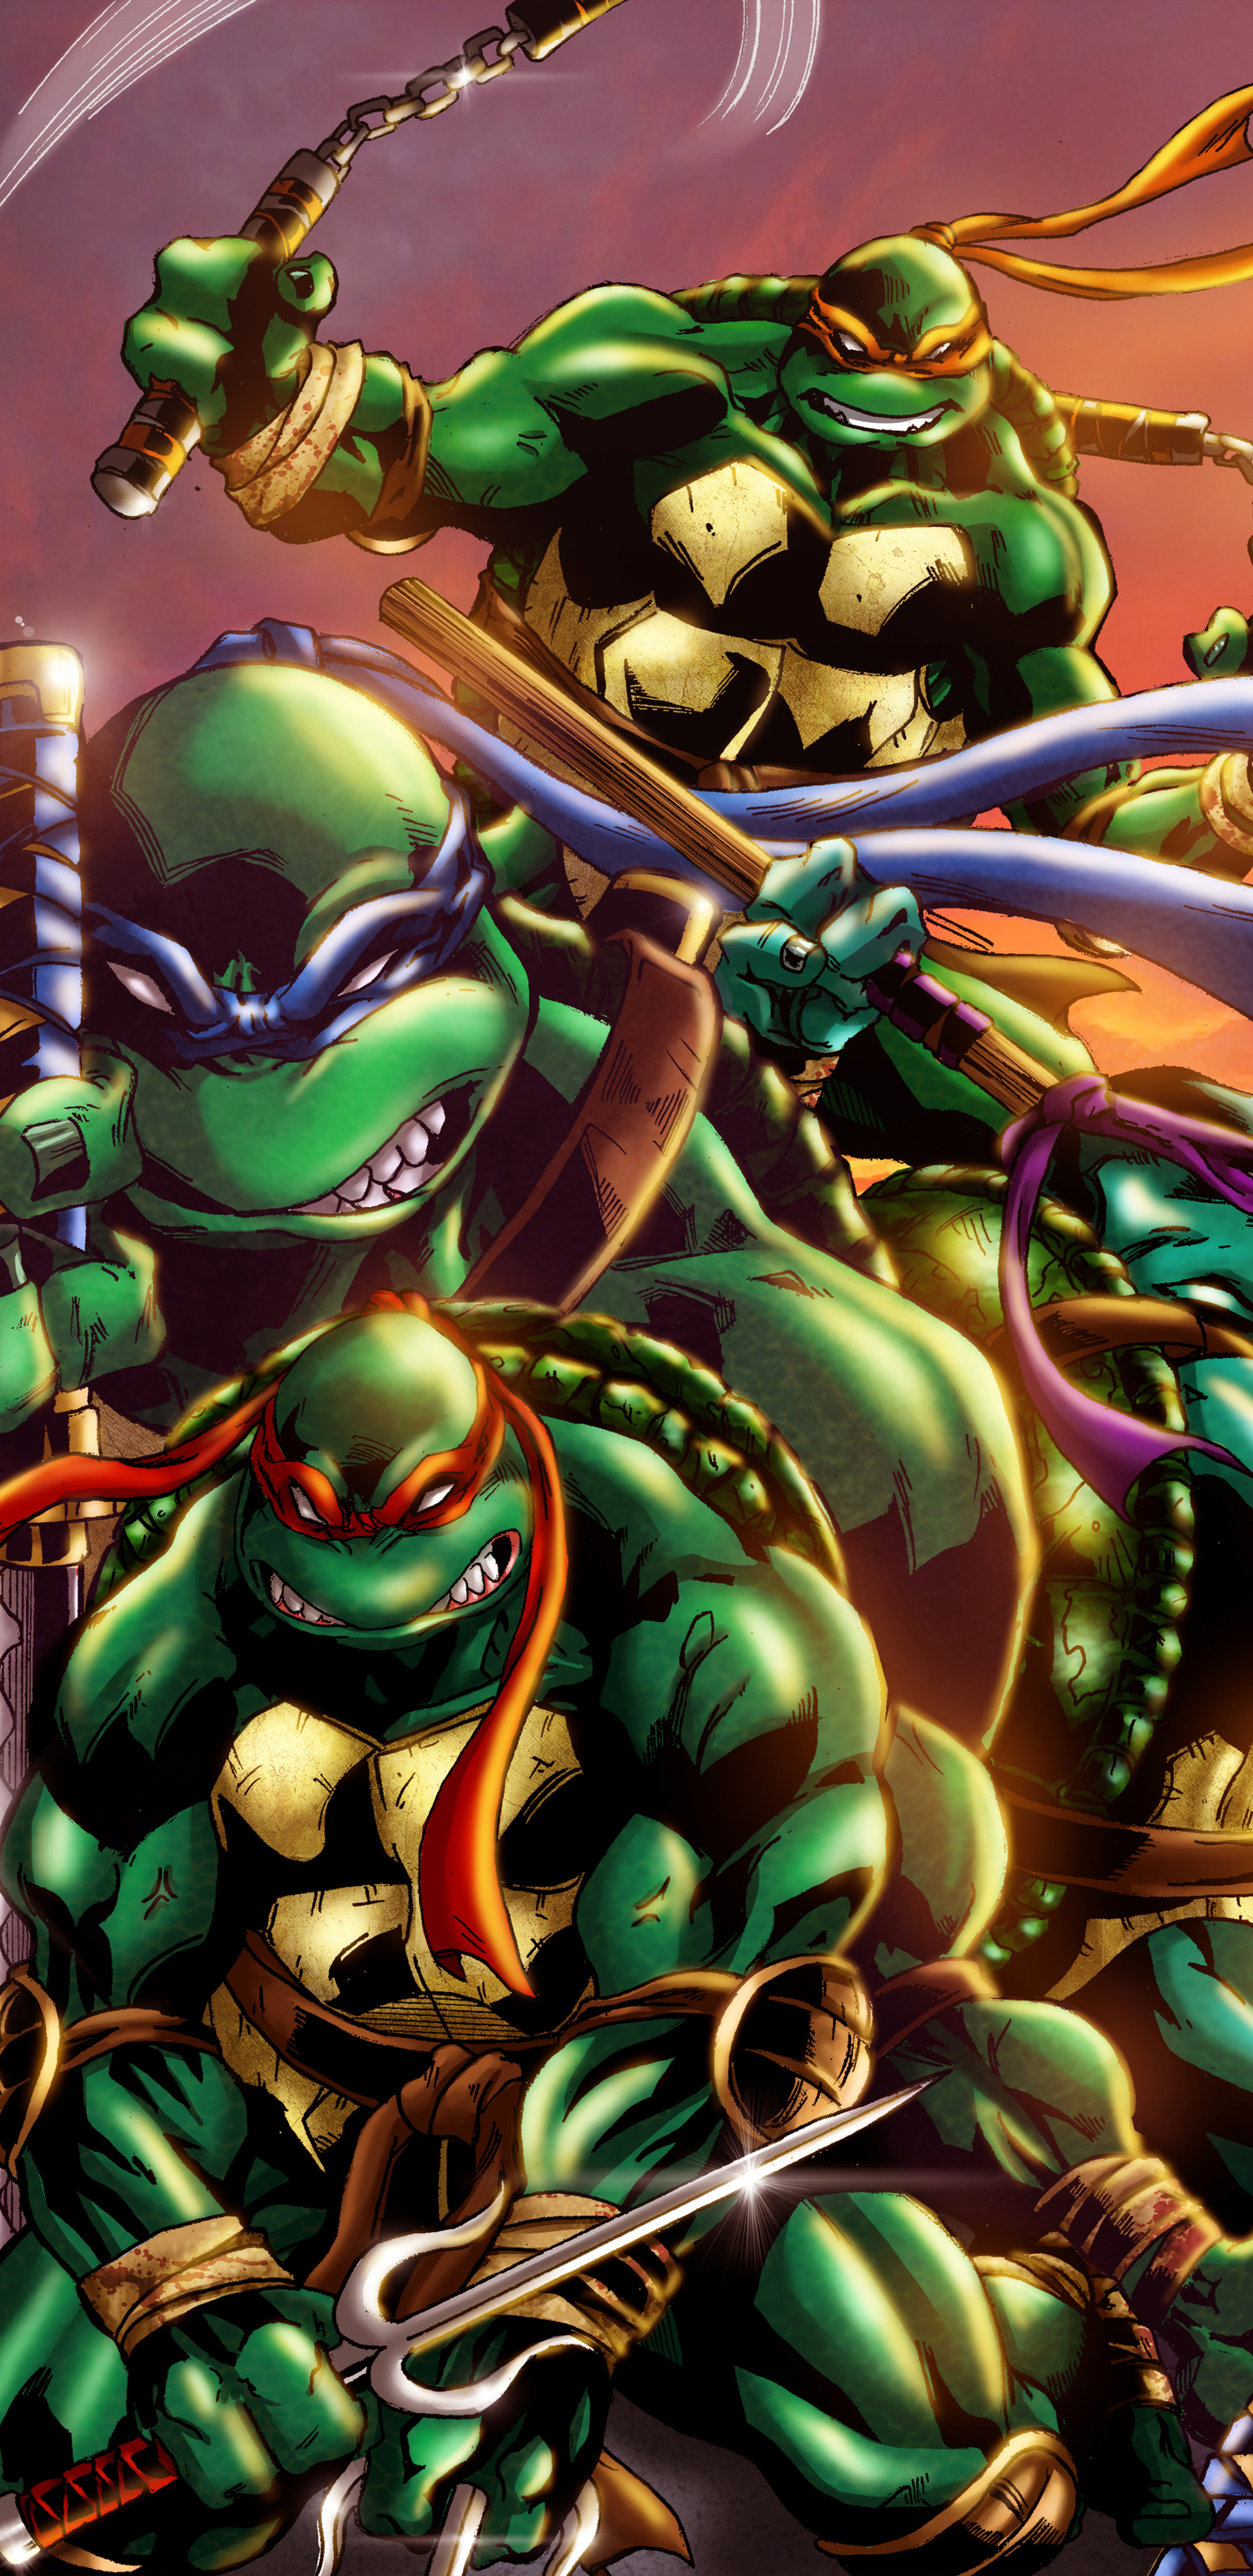 X teenage mutant ninja turtles art samsung galaxy note sss qhd hd k wallpapers images backgrounds photos and pictures